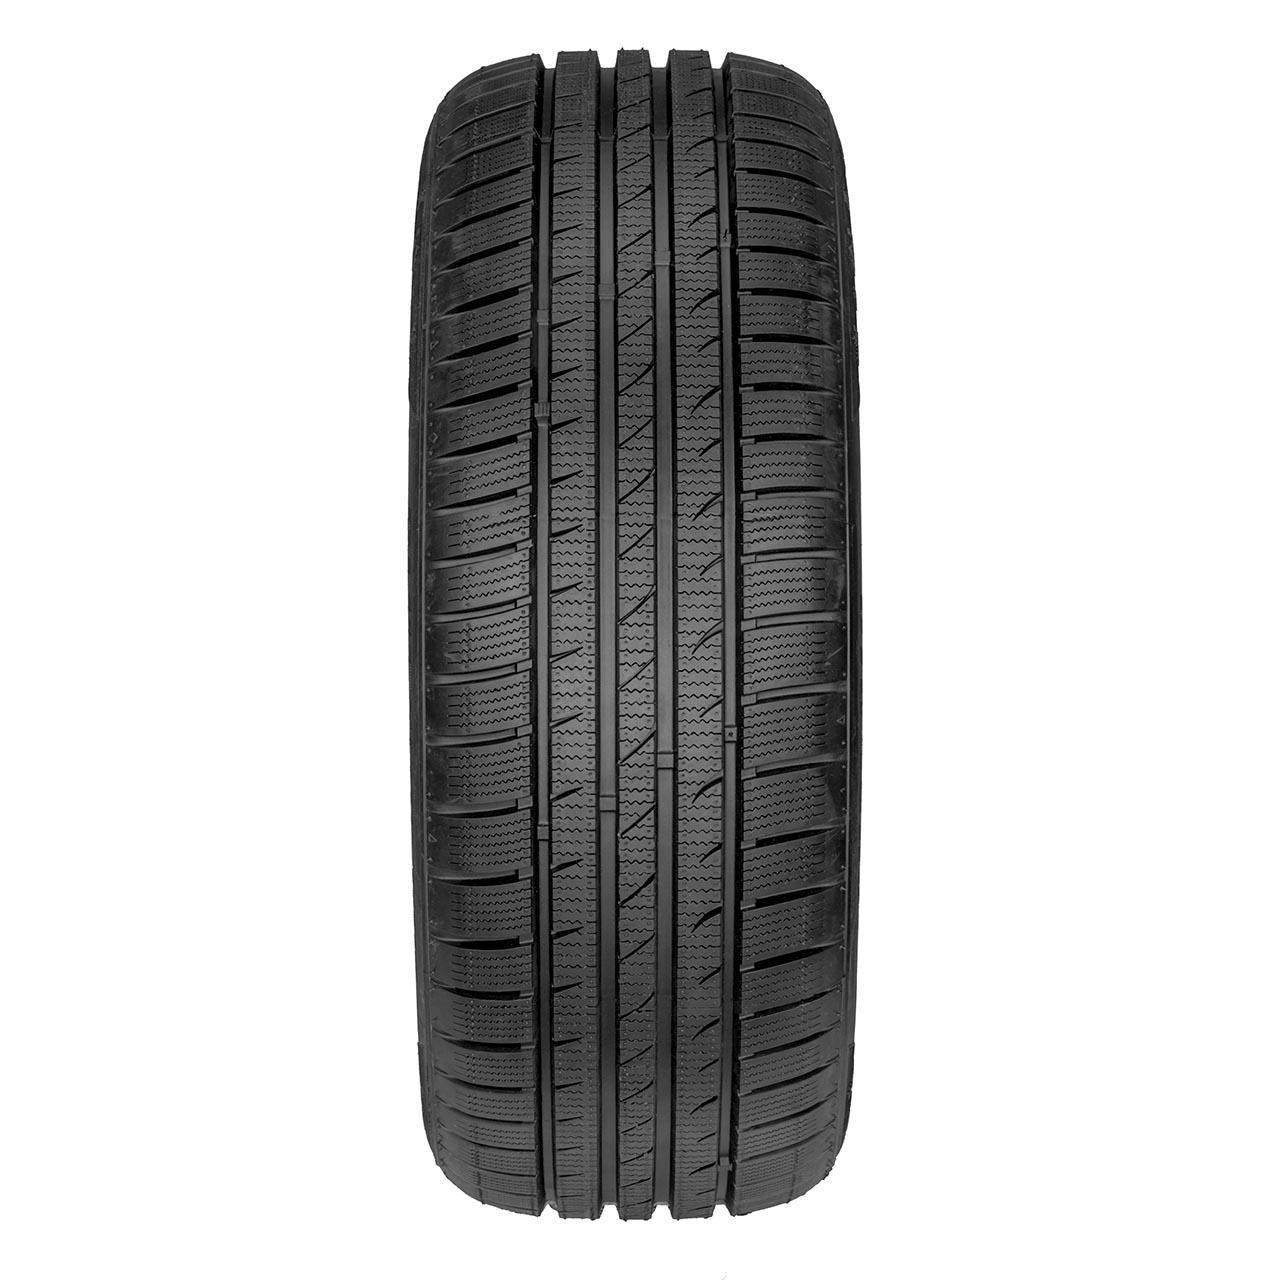 FORTUNA GOWIN UHP 195/55 R16 87H  TL M+S 3PMSF